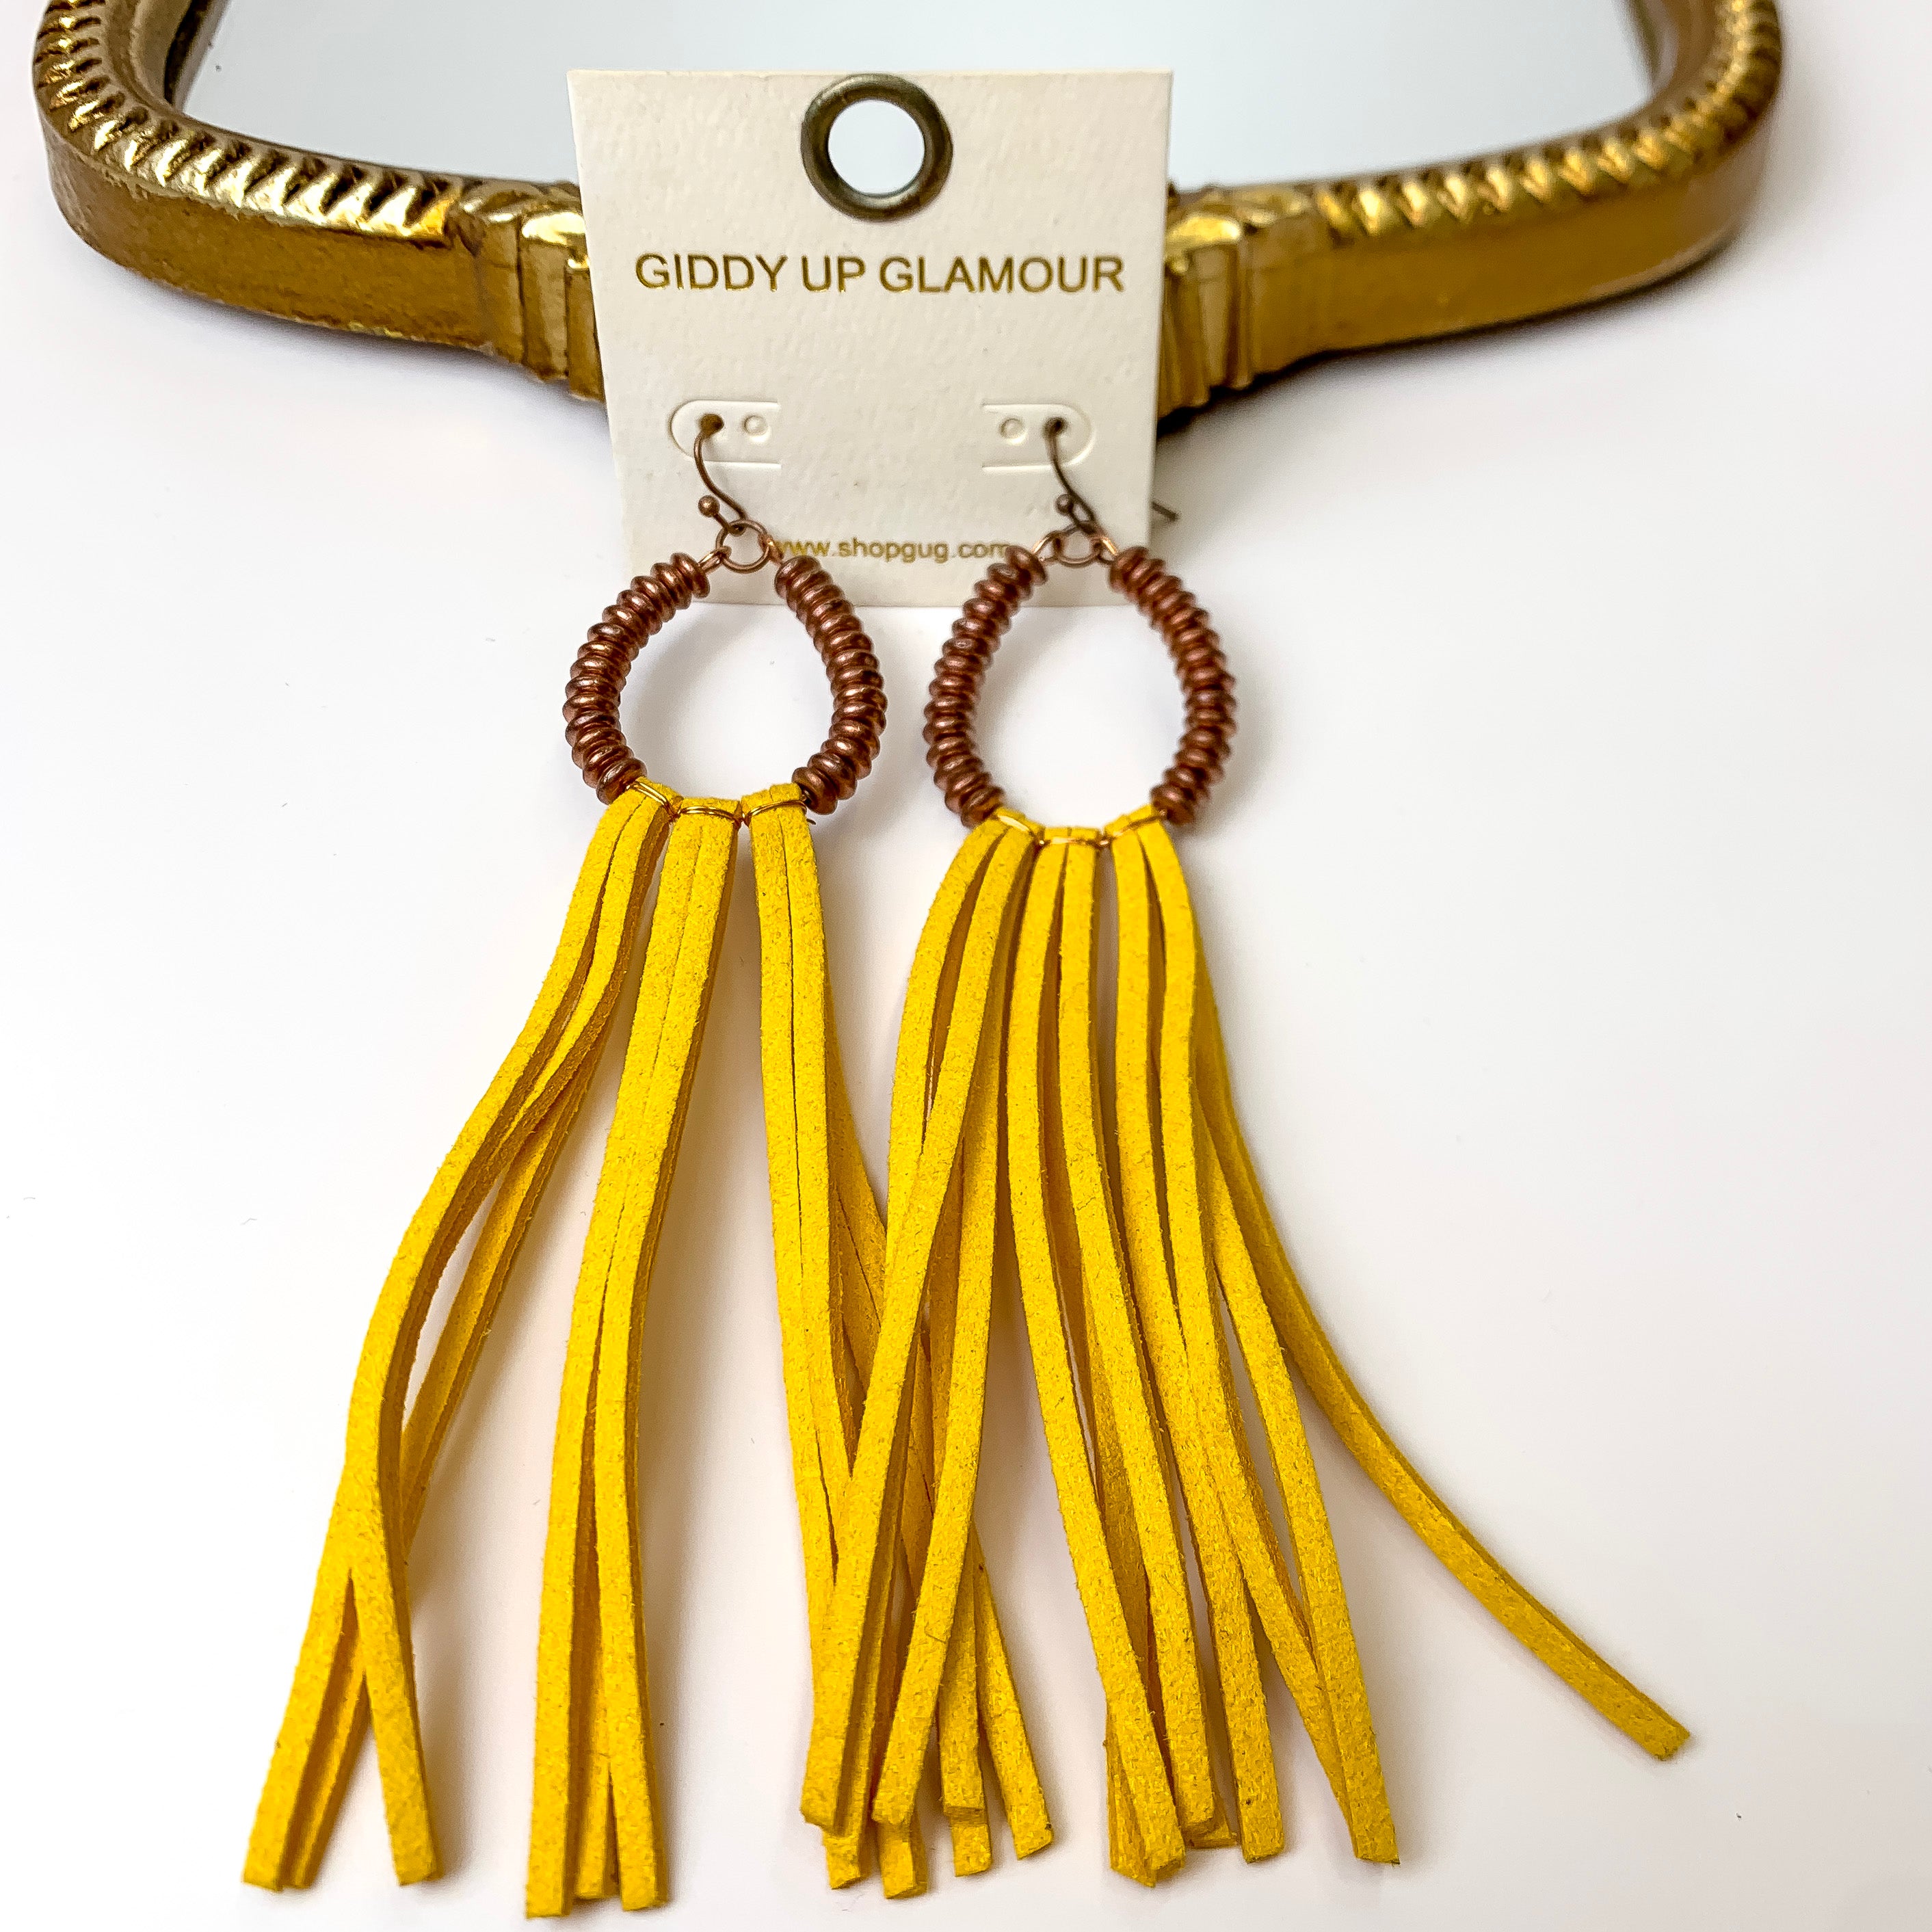 Copper Tone Metal Disk Beaded Teardrop Earrings with Yellow Faux Leather Tassels - Giddy Up Glamour Boutique